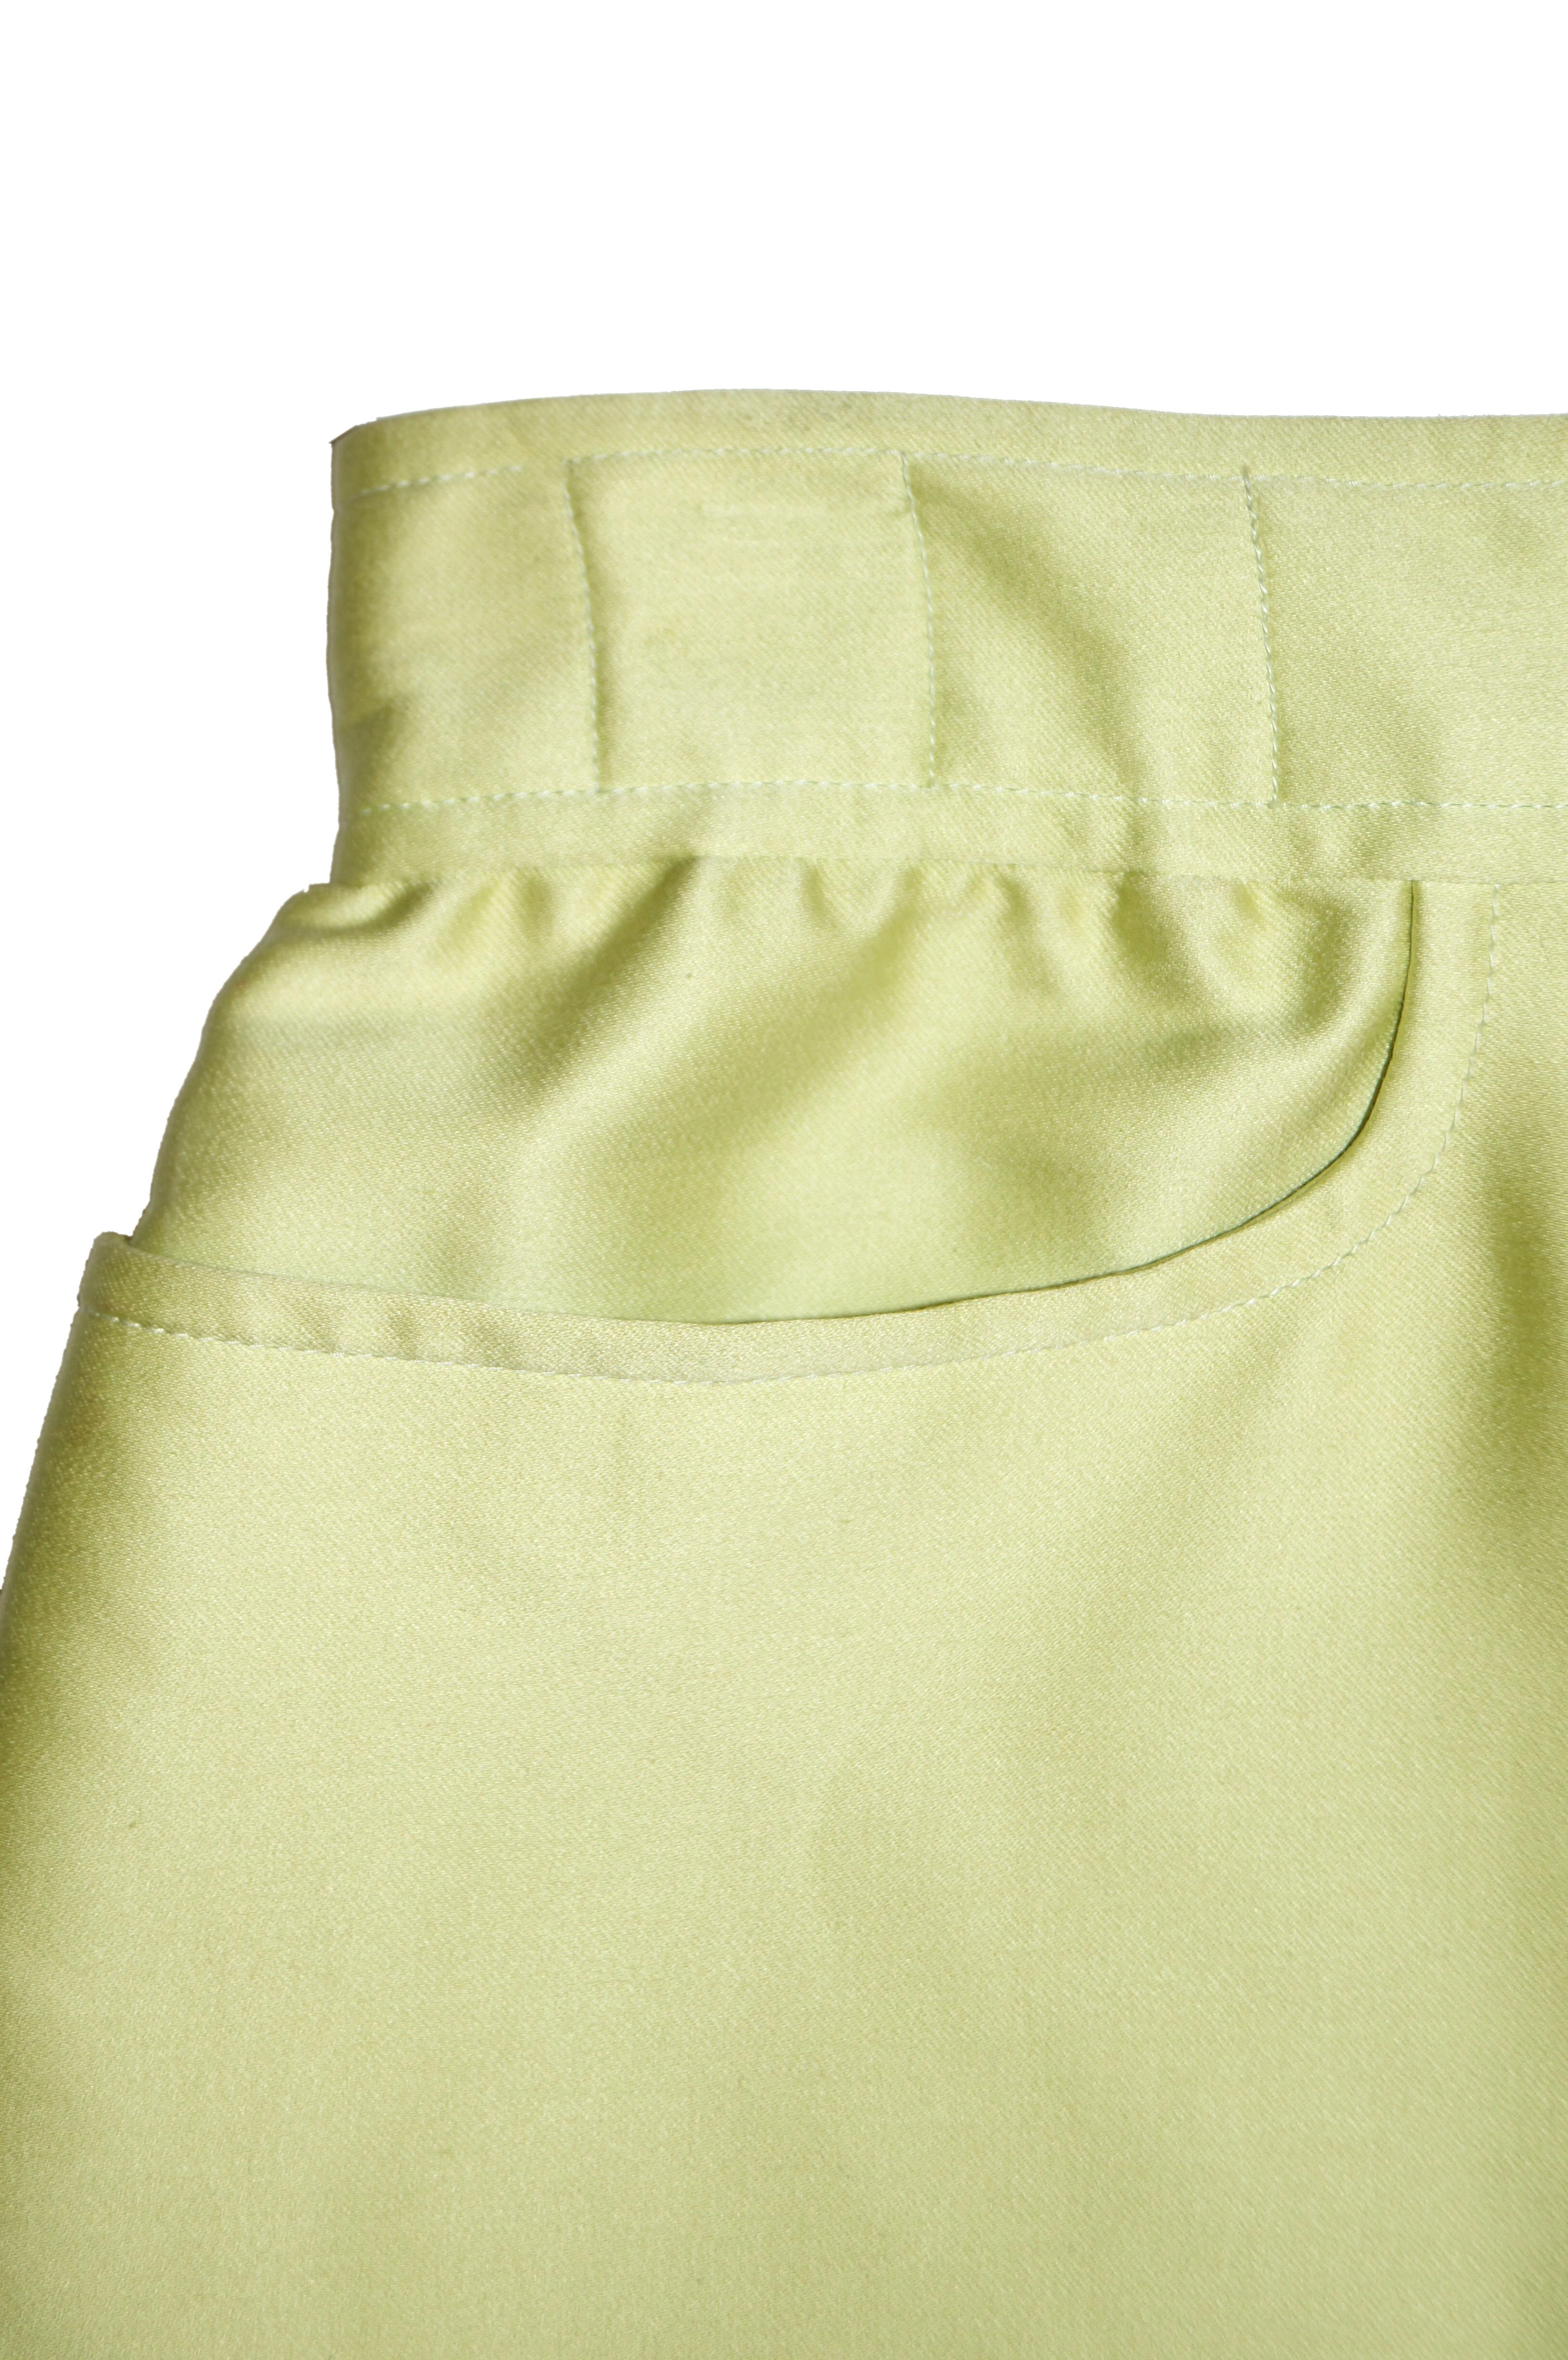 Yellow 1990s Courreges Green Mod Mini Skirt with White Accent Zipper